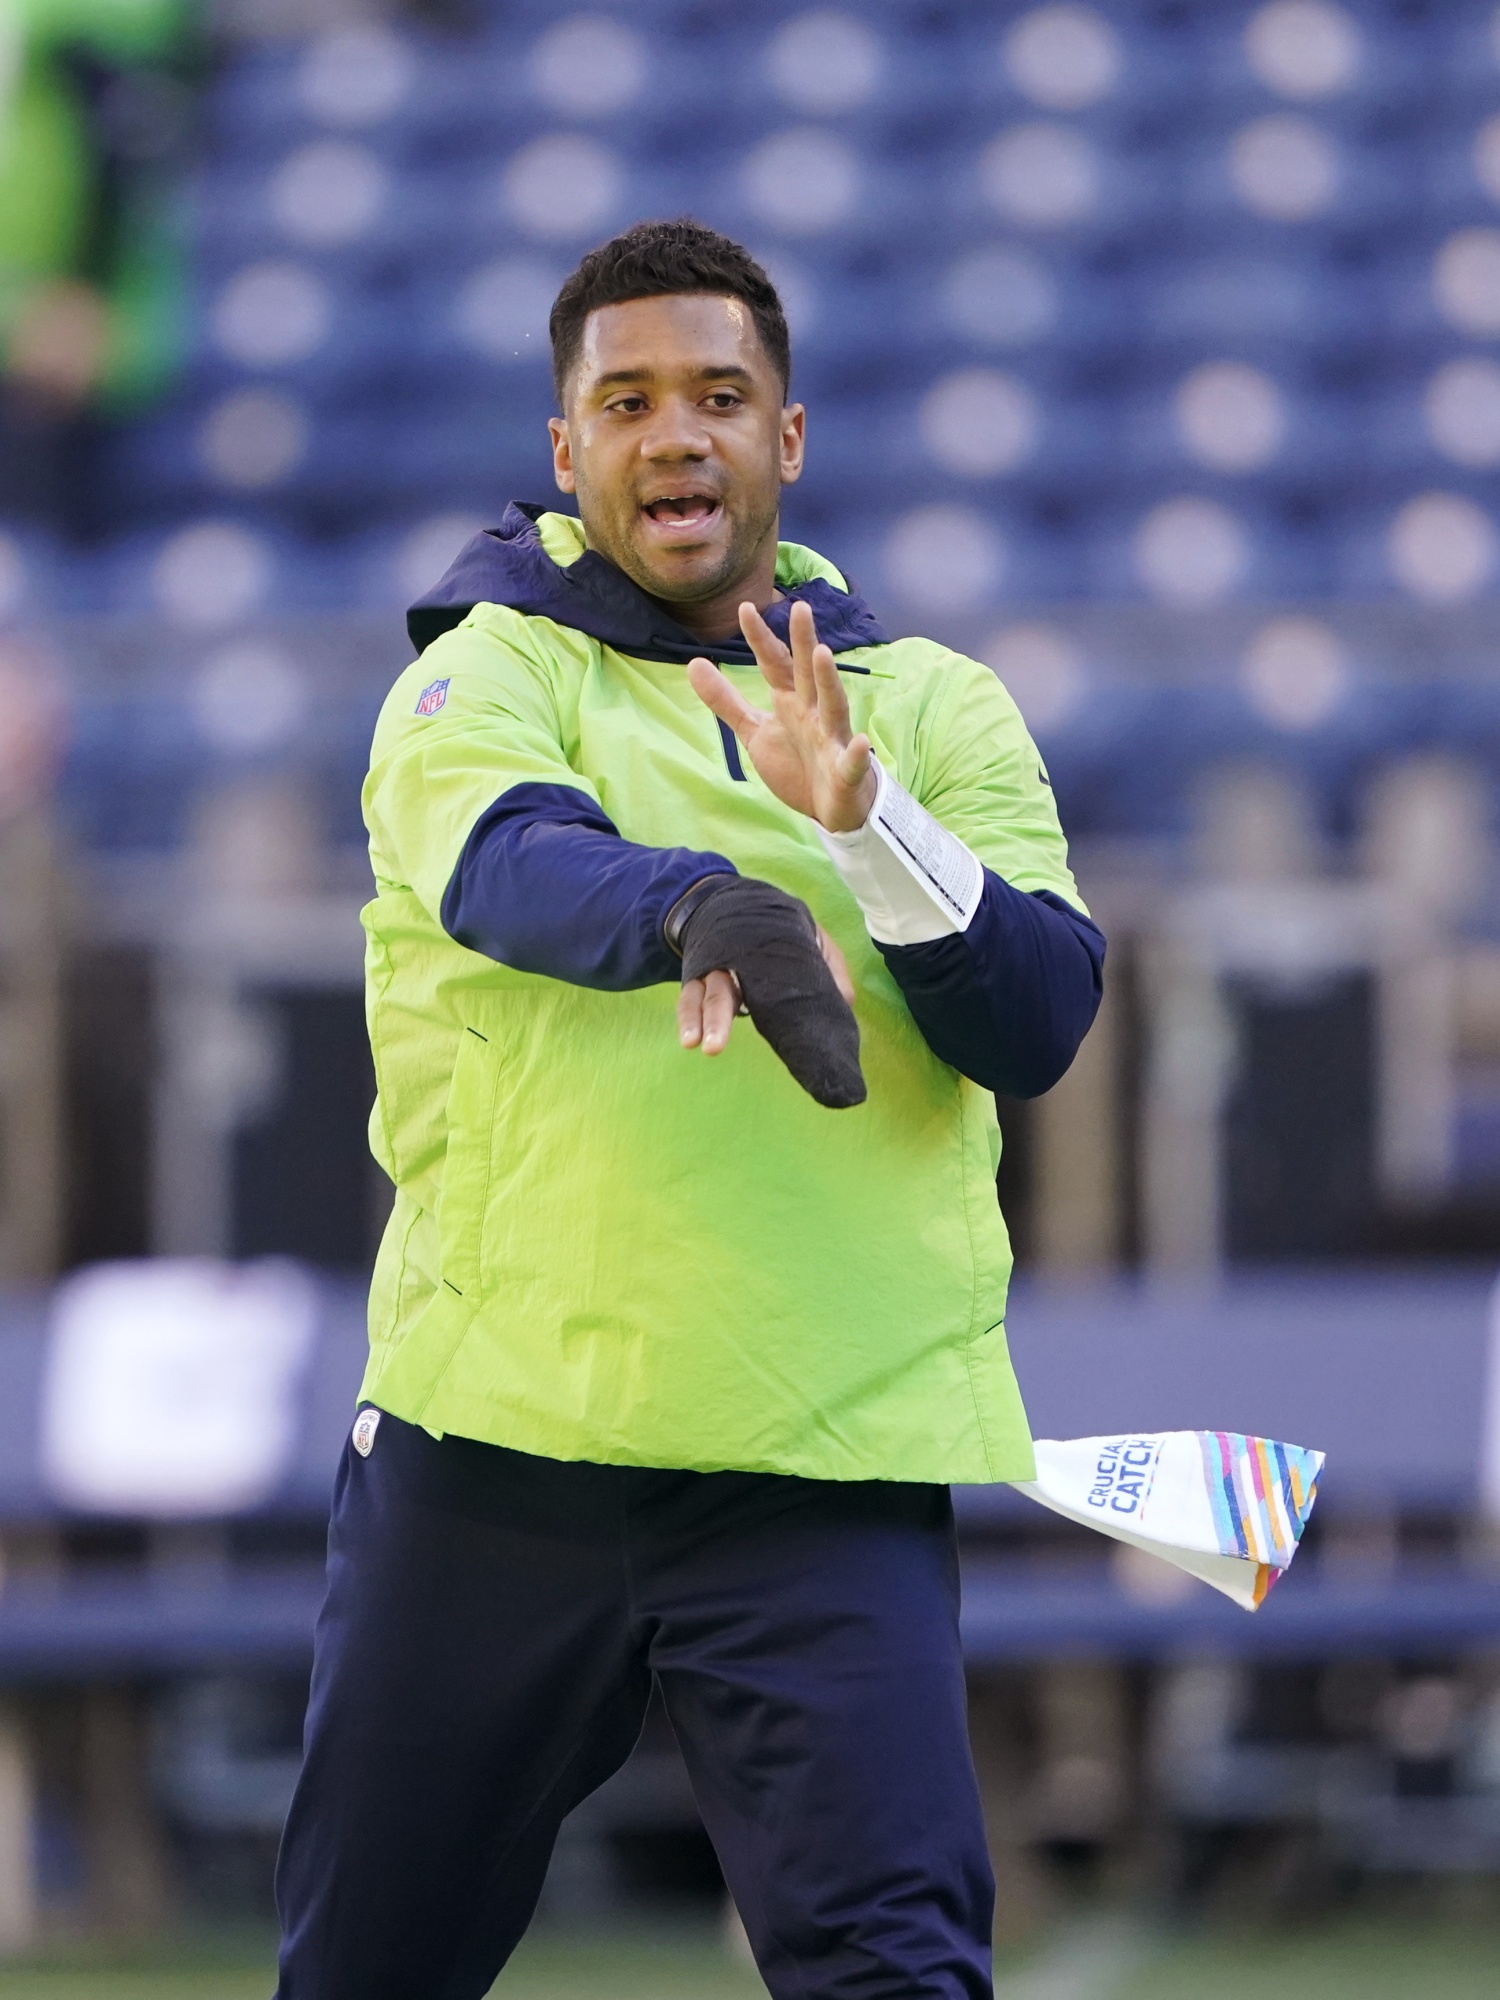 Wilson Cleared to Return to Football Activities for Seattle - Bloomberg